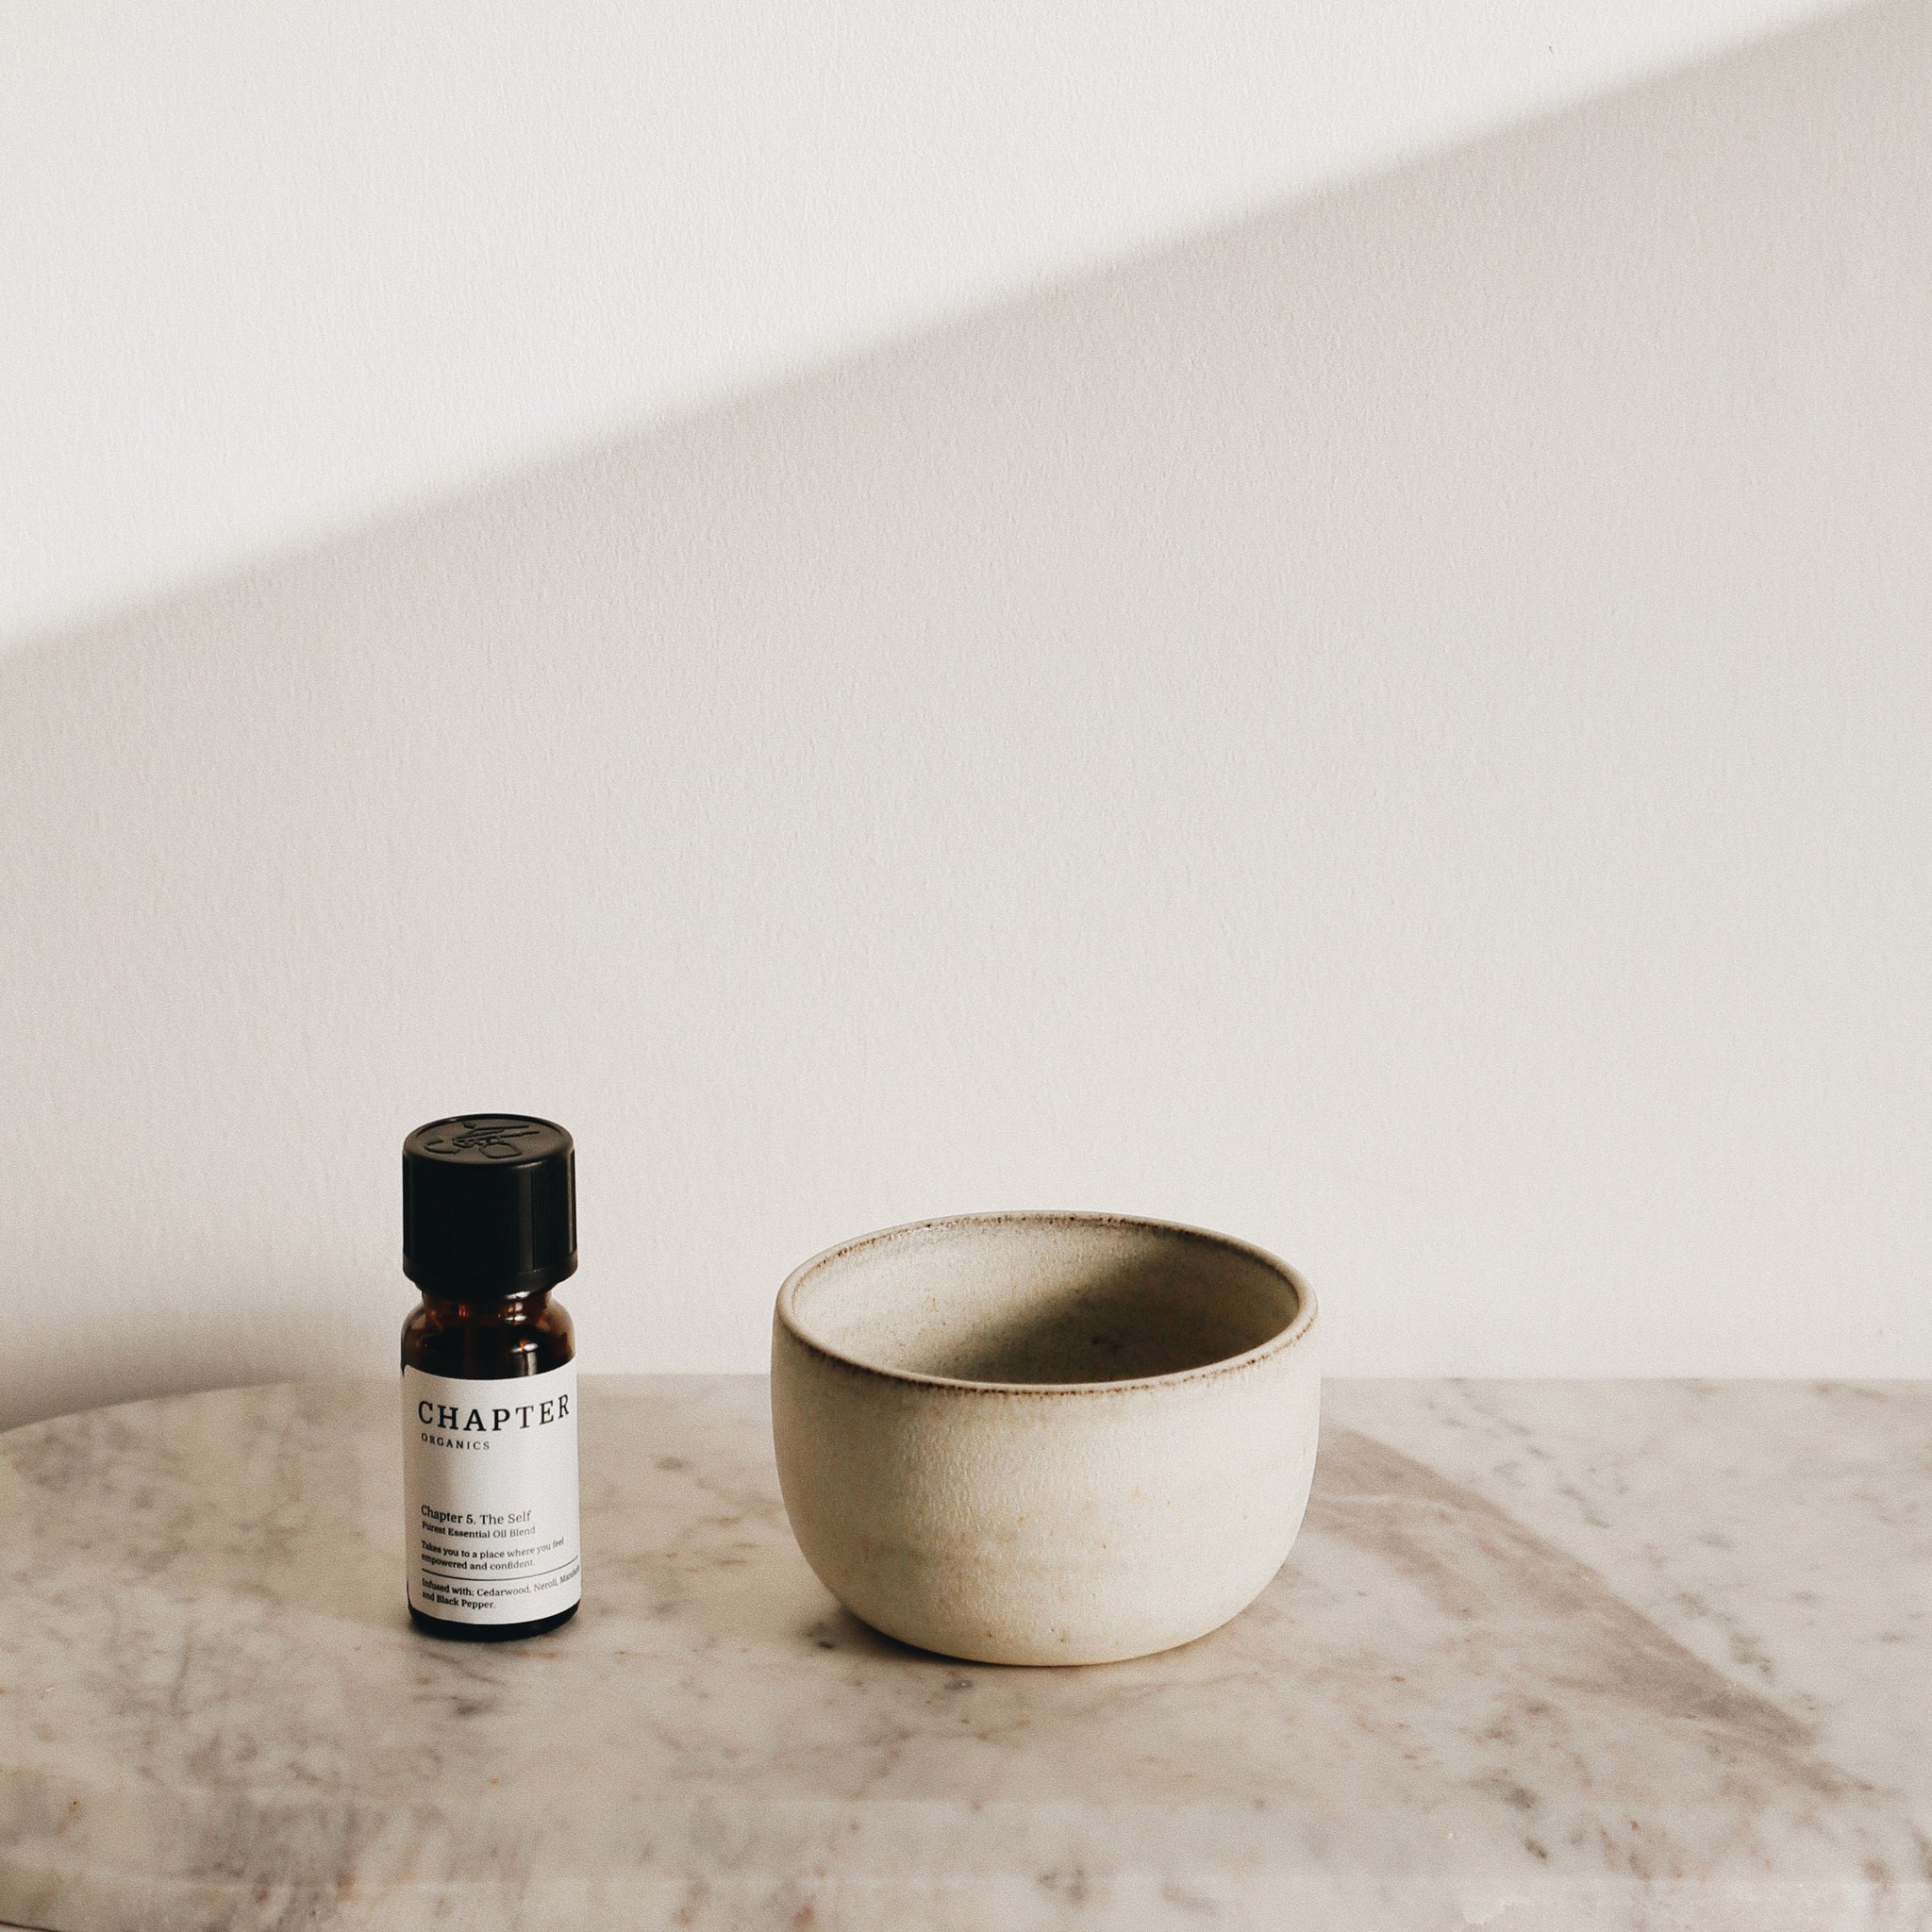 The Remedy Purest Essential Oil Blend